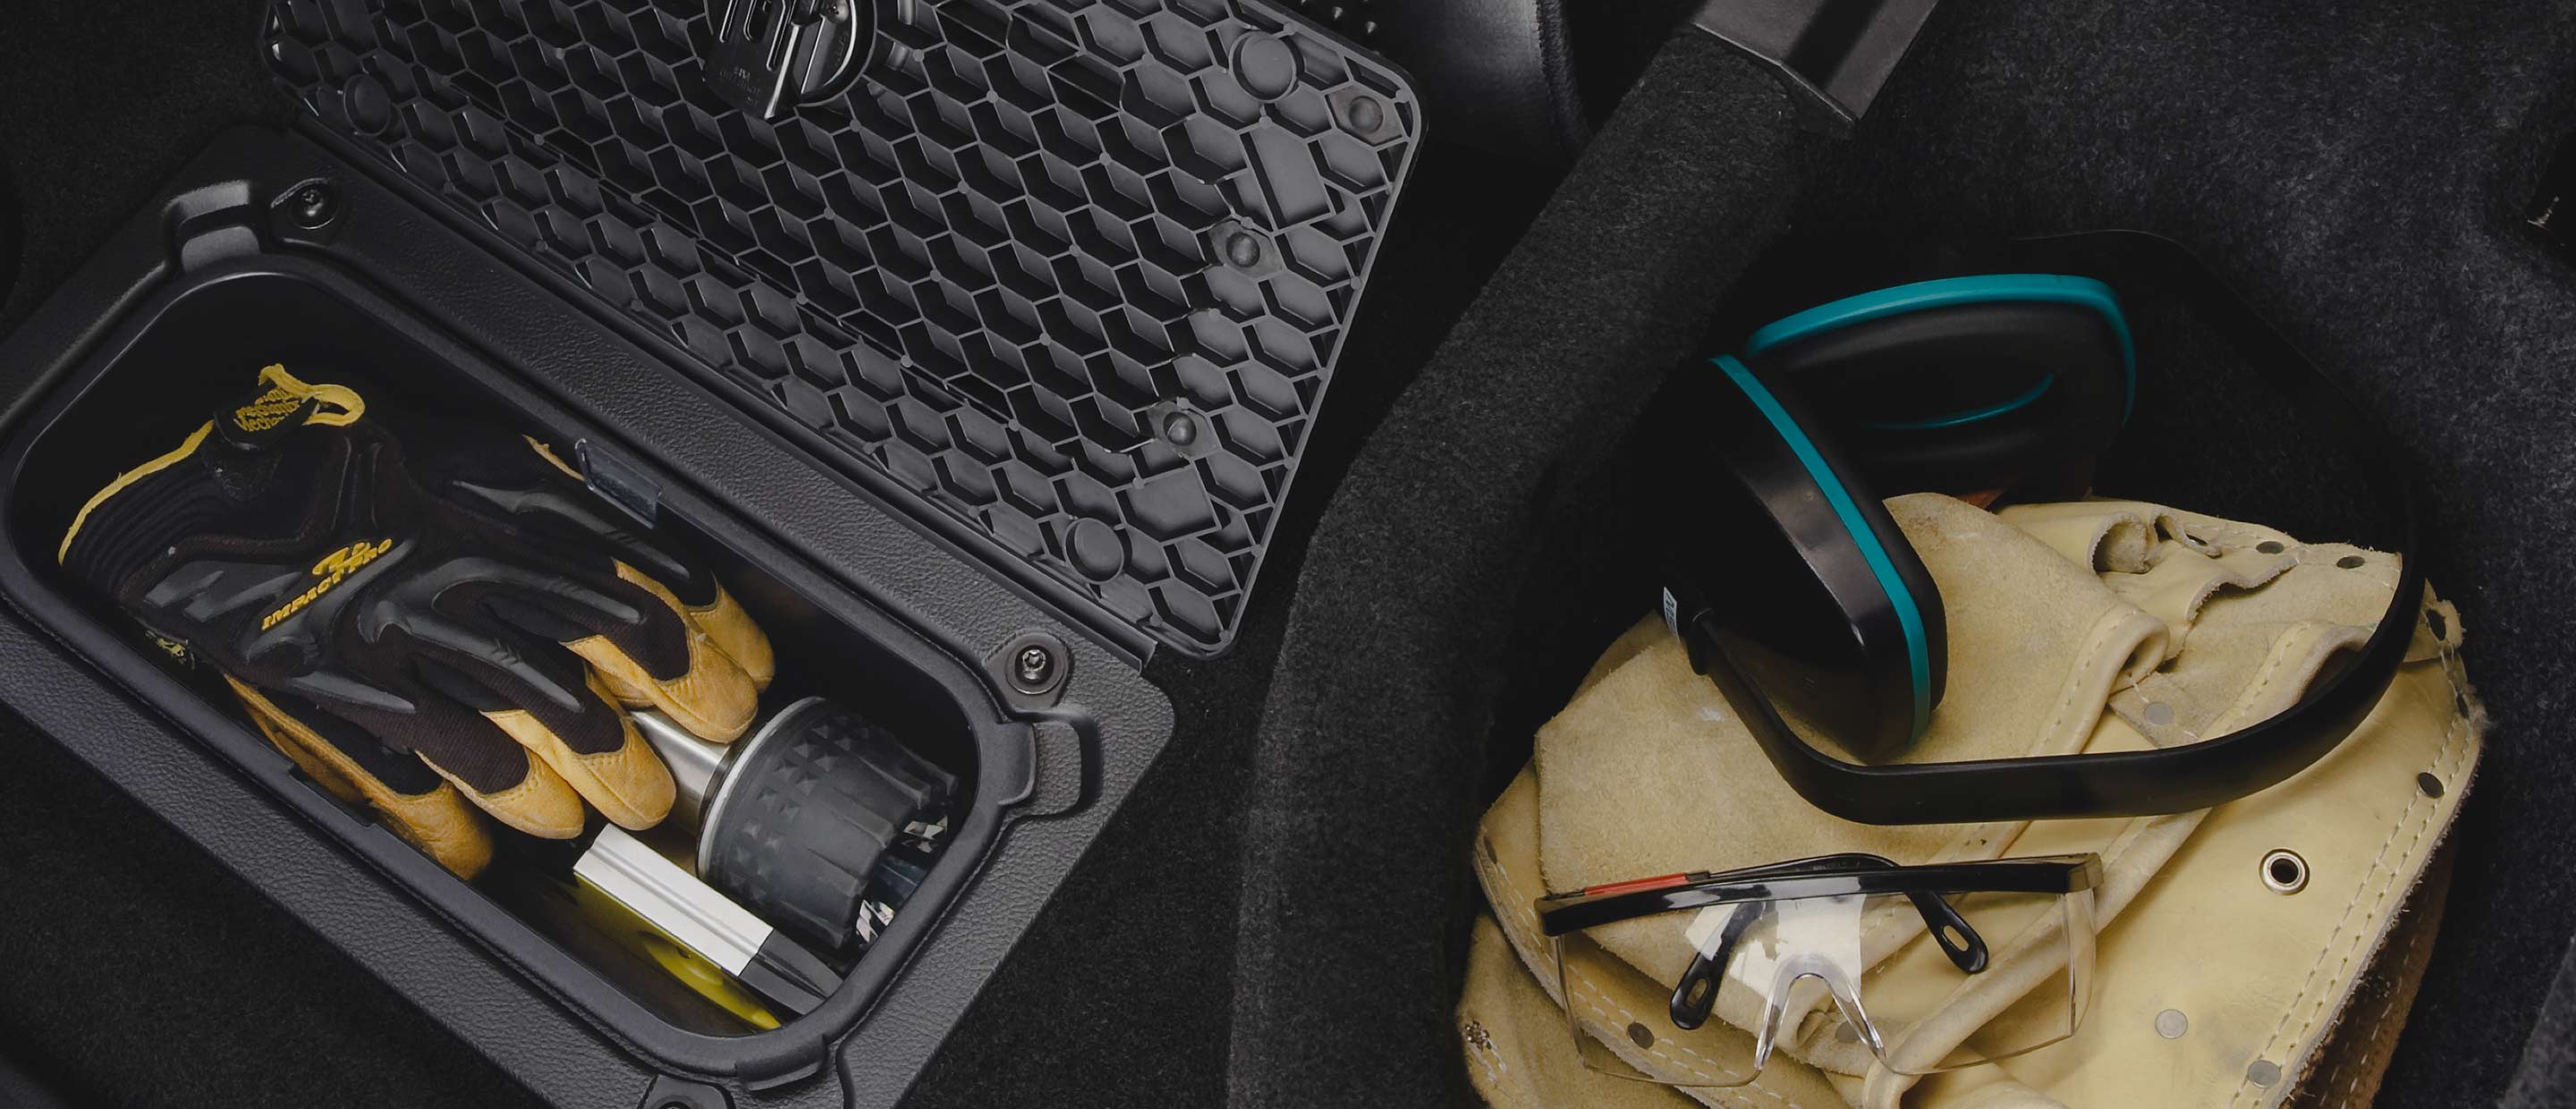 The Ram Bin in the 2022 Ram 1500 Classic, containing a pair of work gloves and a flashlight.